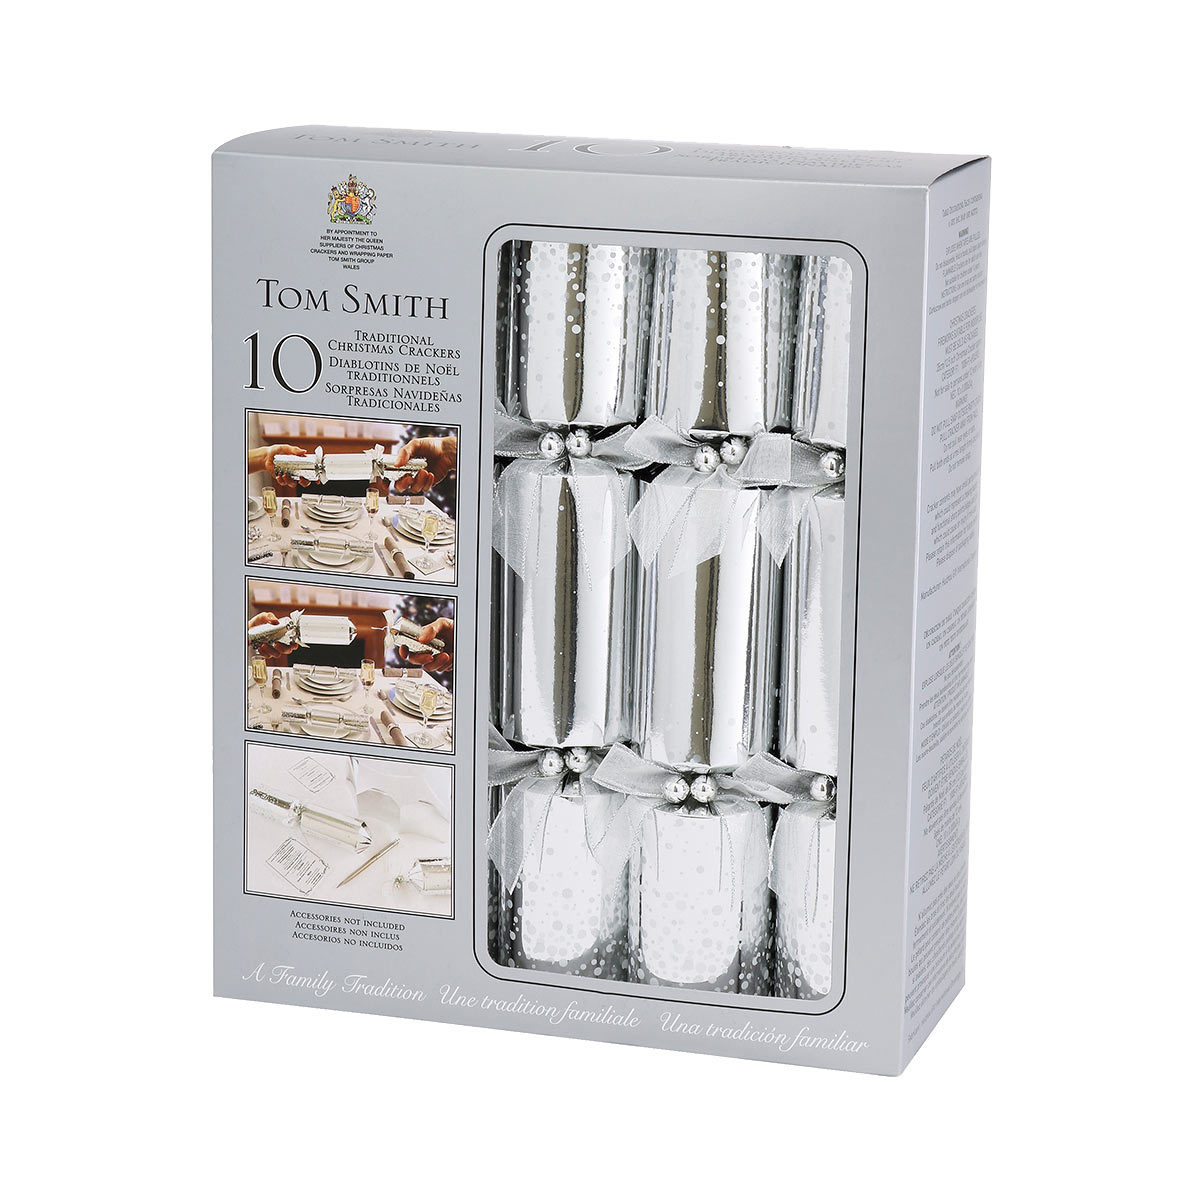 Tom Smith 12.5" (32cm) Traditional Christmas Cracker 10 Pack in Silver